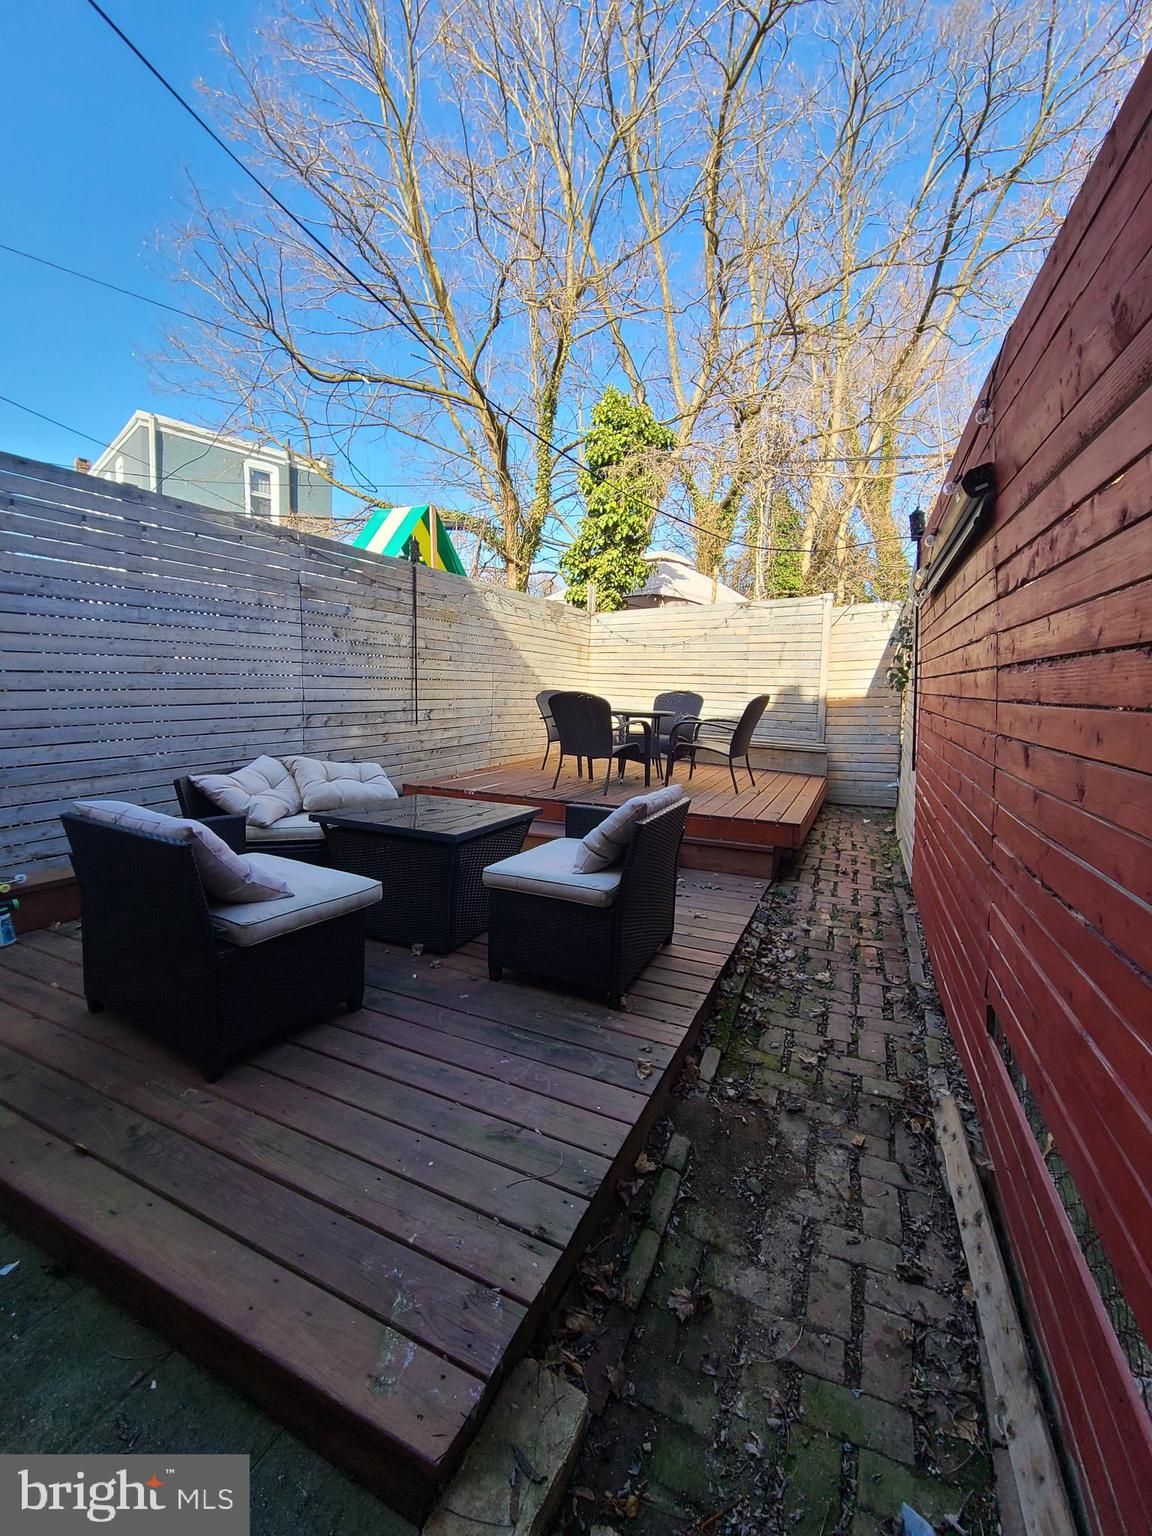 a view of a backyard with sitting area